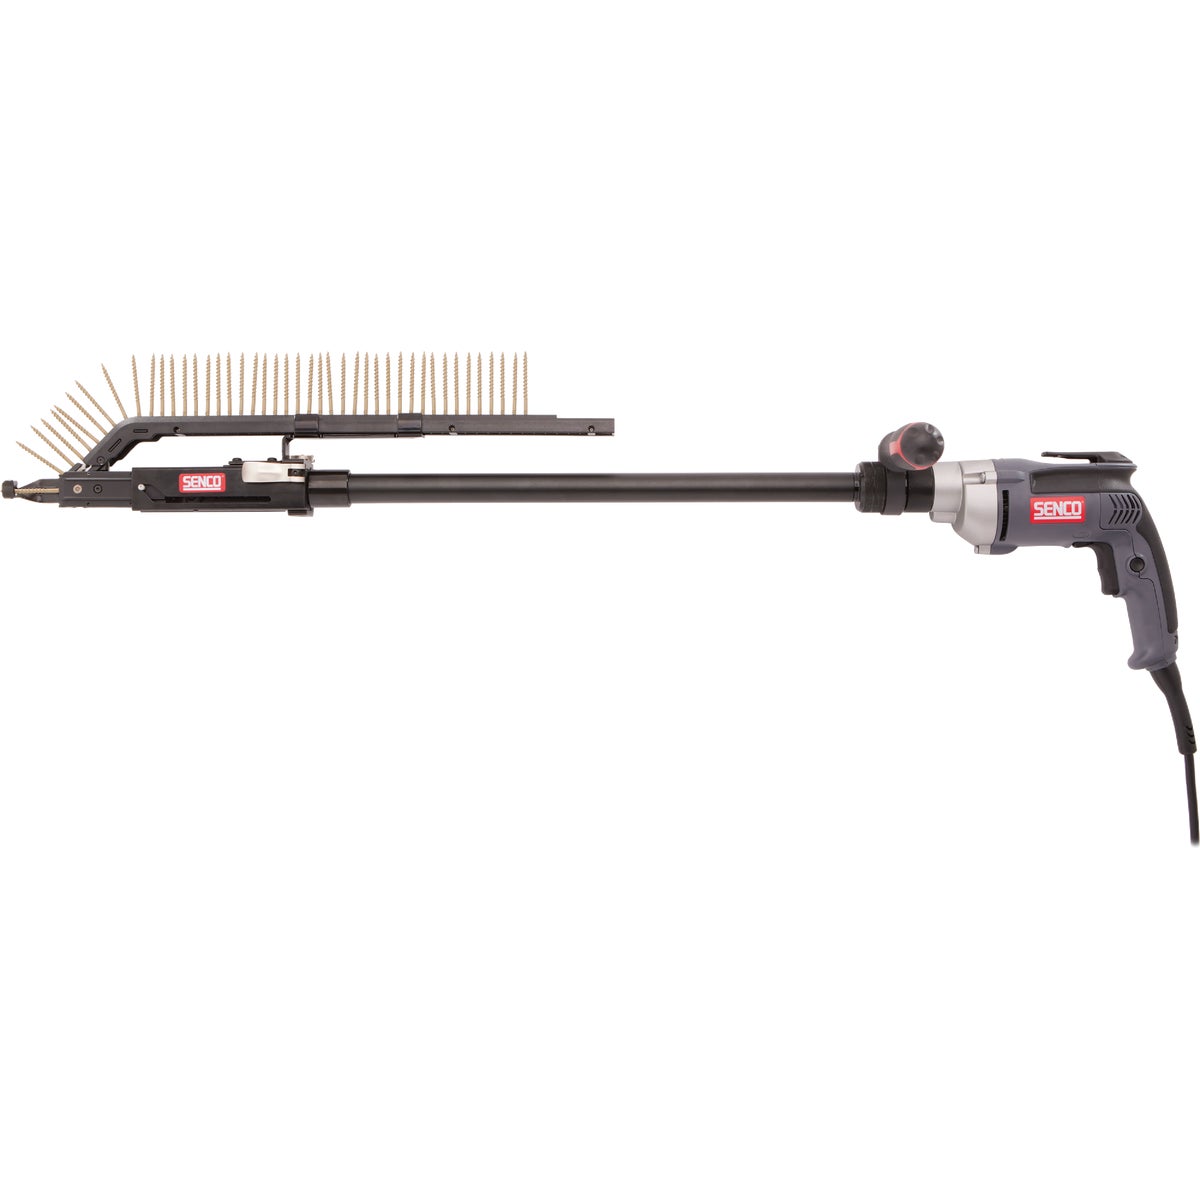 Item 366053, Extremely versatile auto-feed attachment for professionals driving screws 